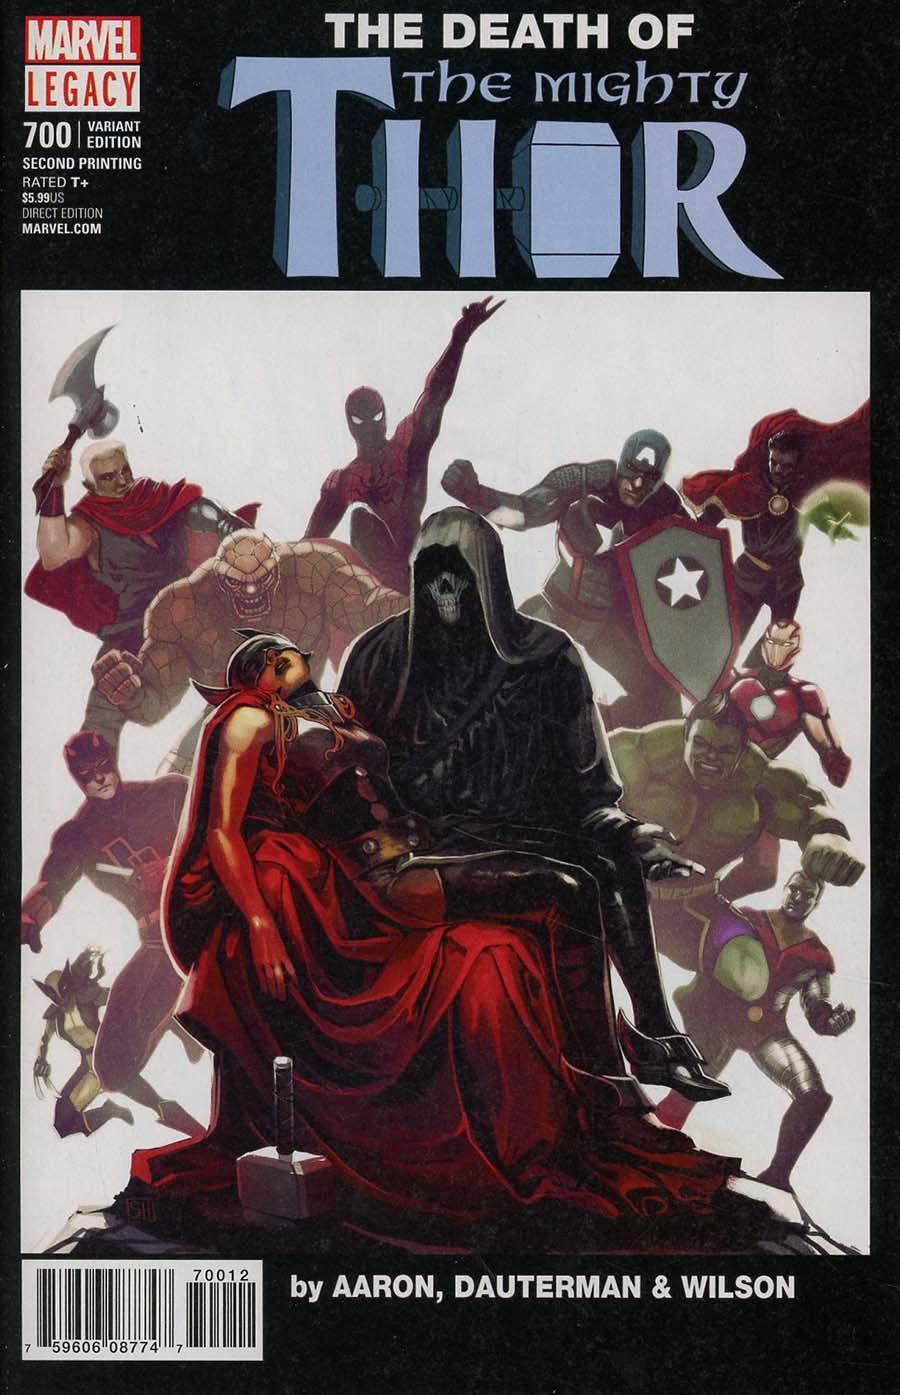 The Mighty Thor Vol. 2 #700